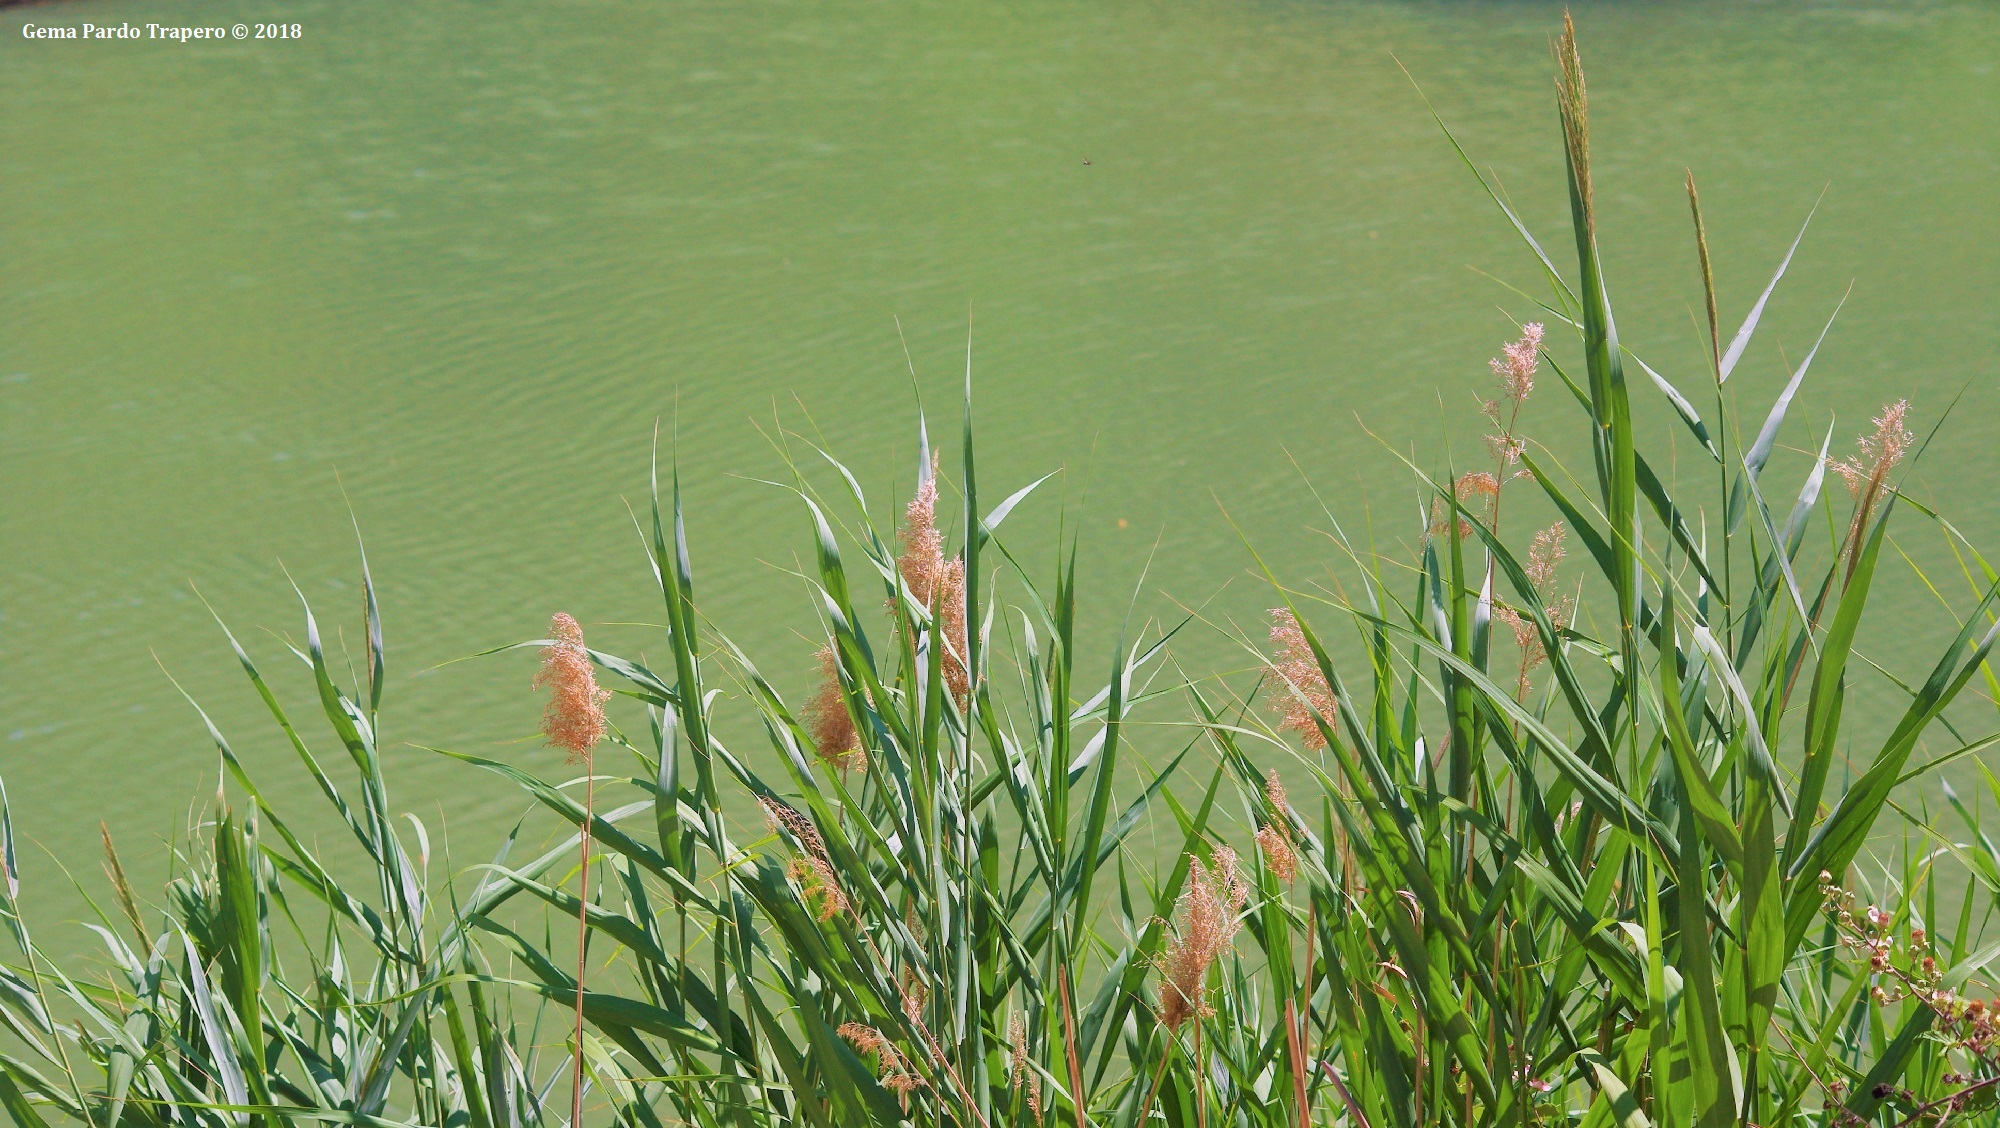 earth, river, nature, reed, spain, water 32K